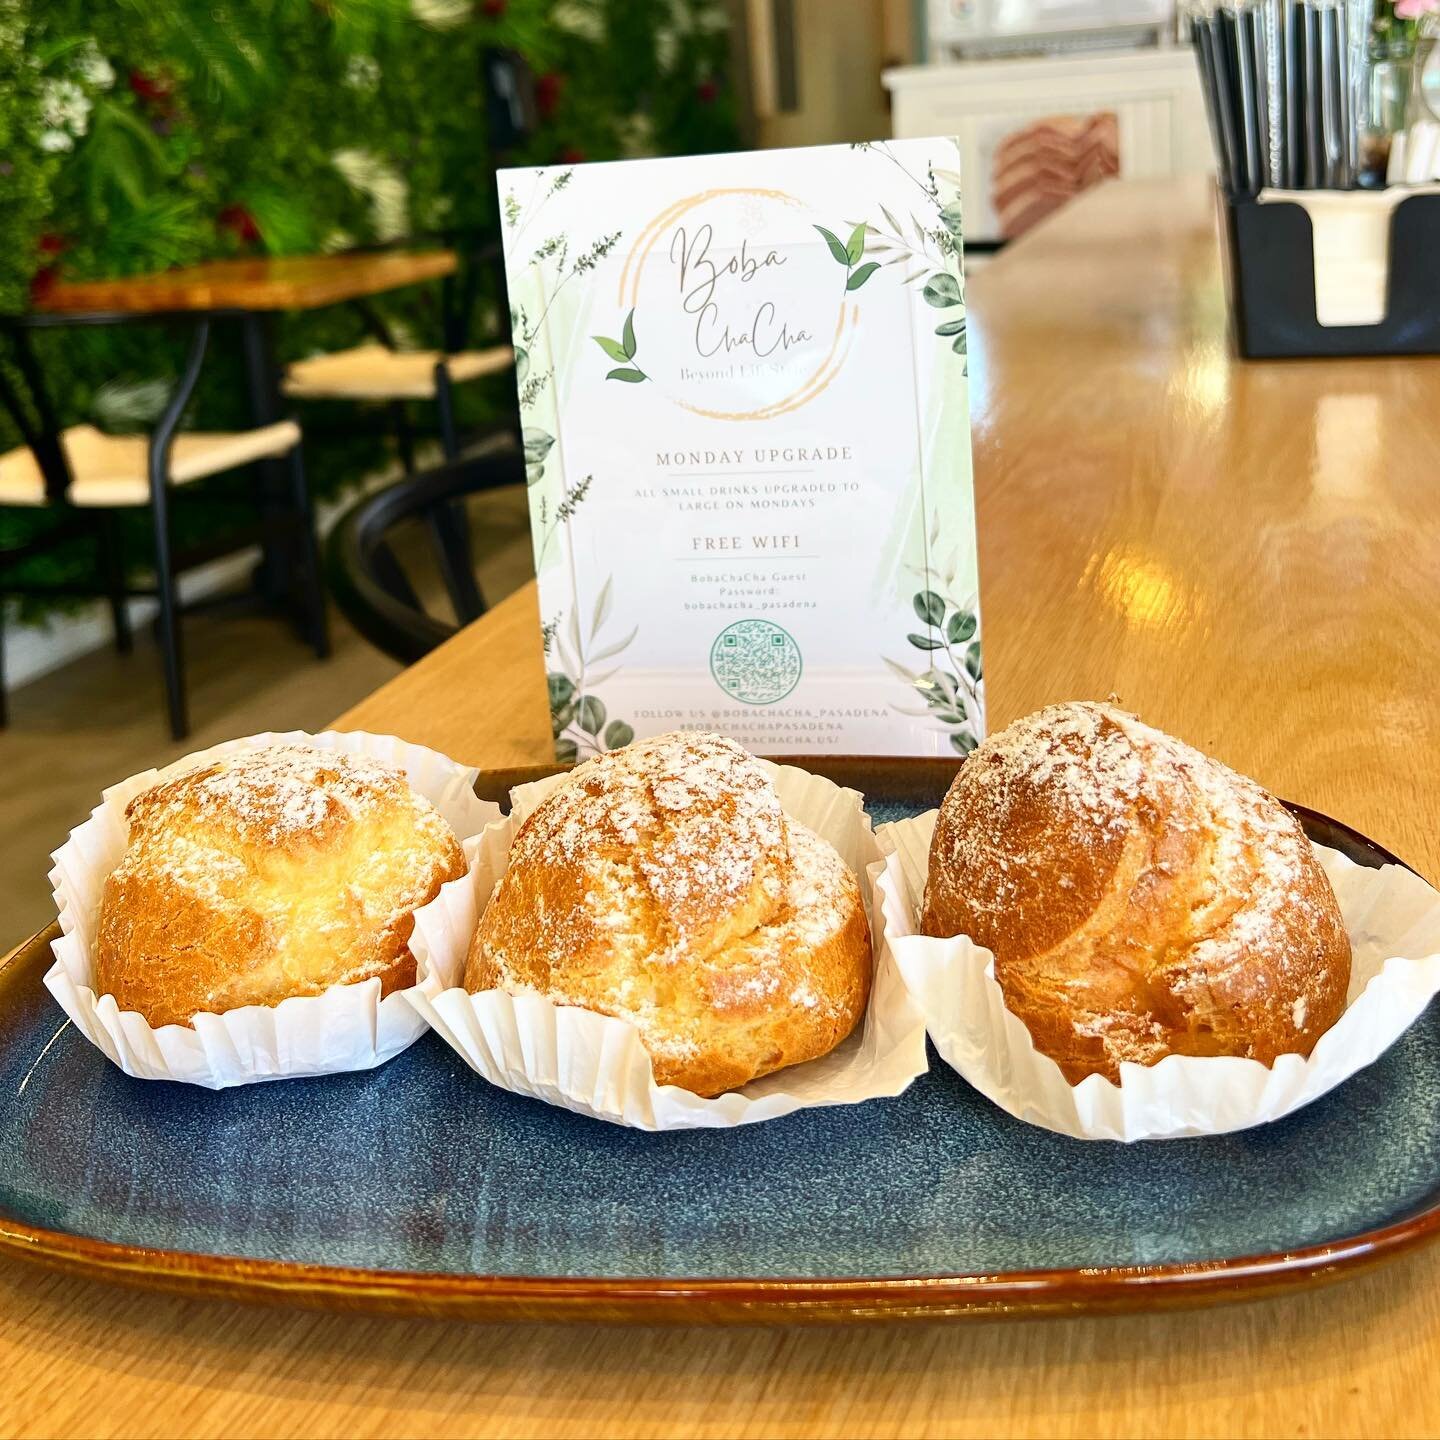 It&rsquo;s Wednesday and we are splurging with cream puffs 💗🧋

Fresh baked locally sourced pastries and sweets make the perfect match to our drinks 💗🧋

Make Wednesday great by stopping by Boba Cha Cha 💗

.
.
.
.

#boba #bubbletea #bobatea #milkt